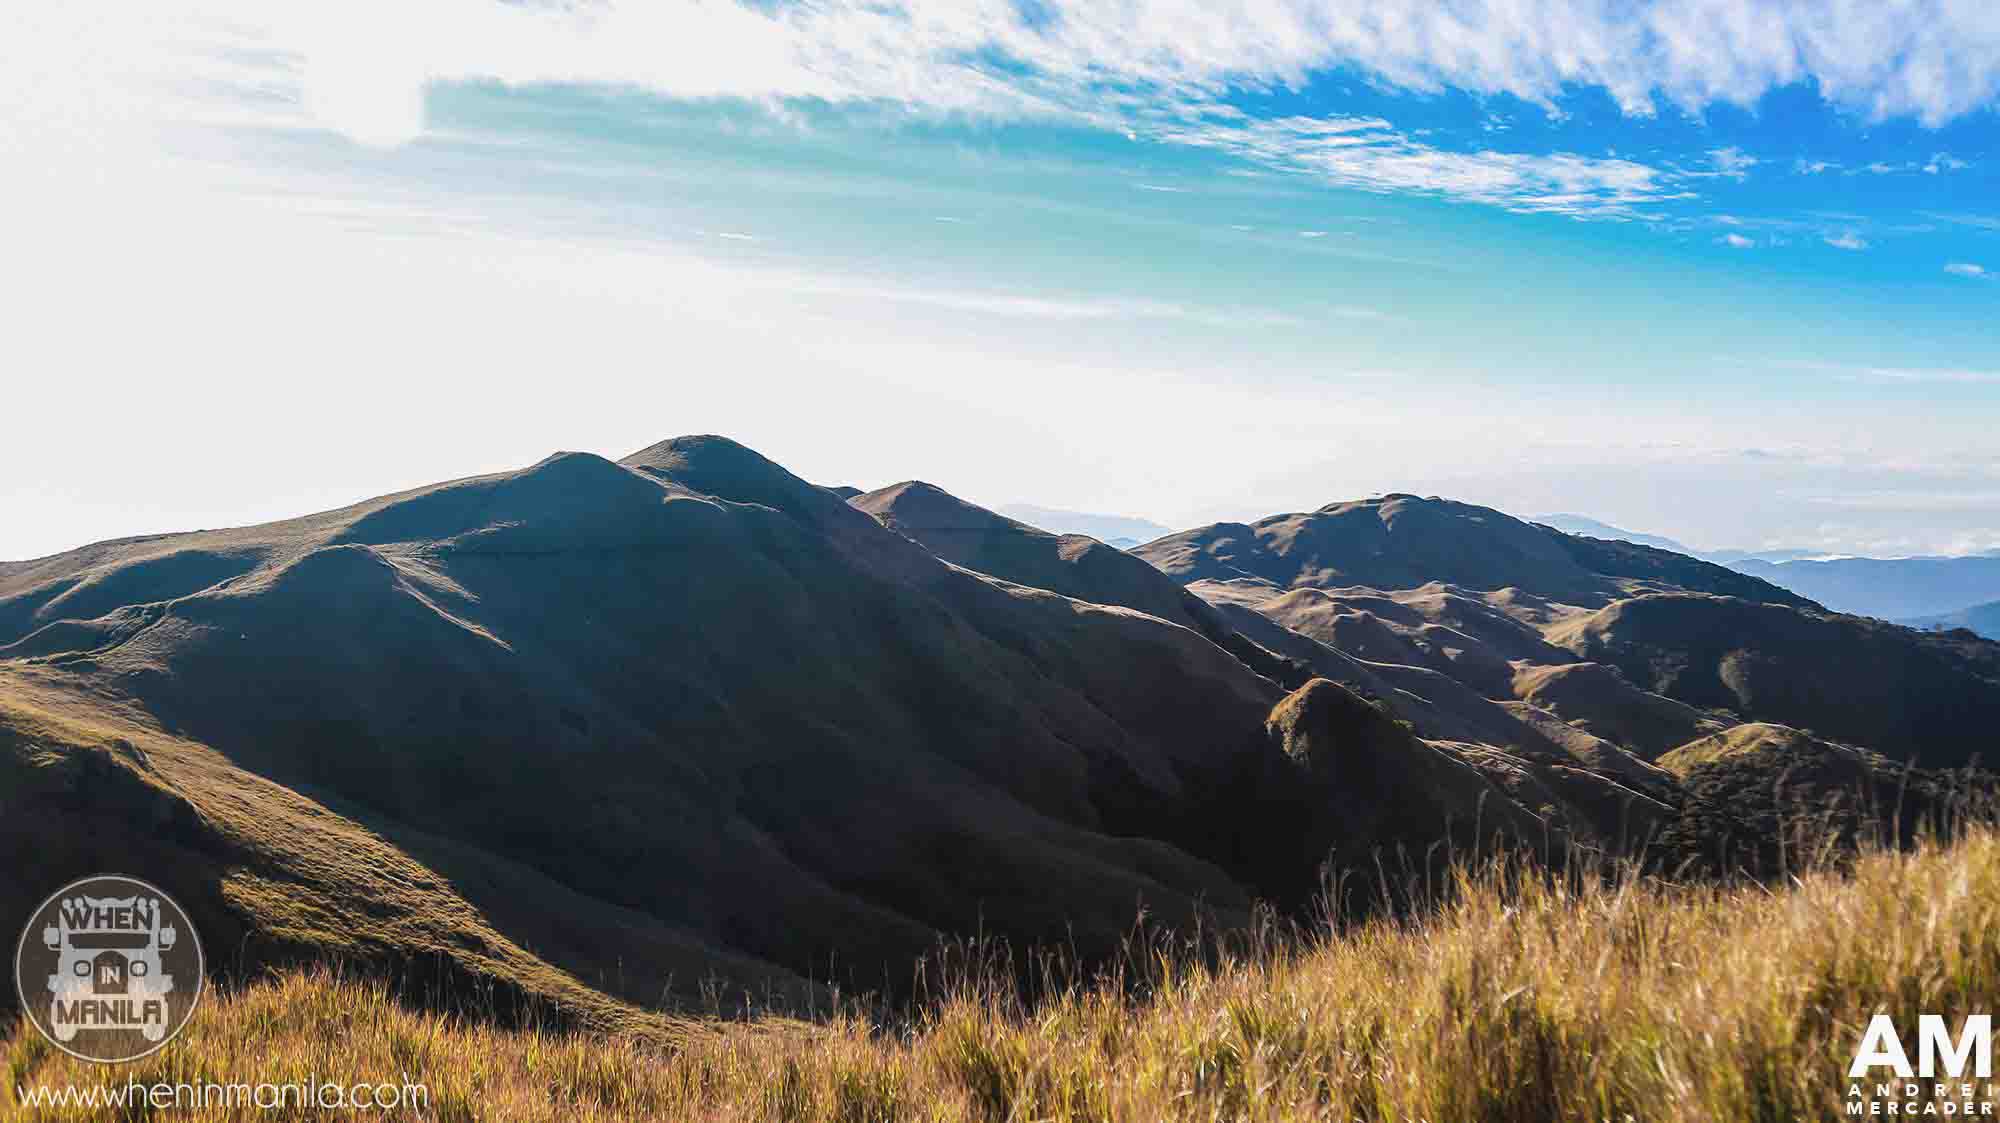 Mount Pulag, Benguet Province, Hiking, Camping, Trekking, Mountaineering, Sea of Clouds, Mount Pulag Summit, Arcobaleno Trail Tours, 